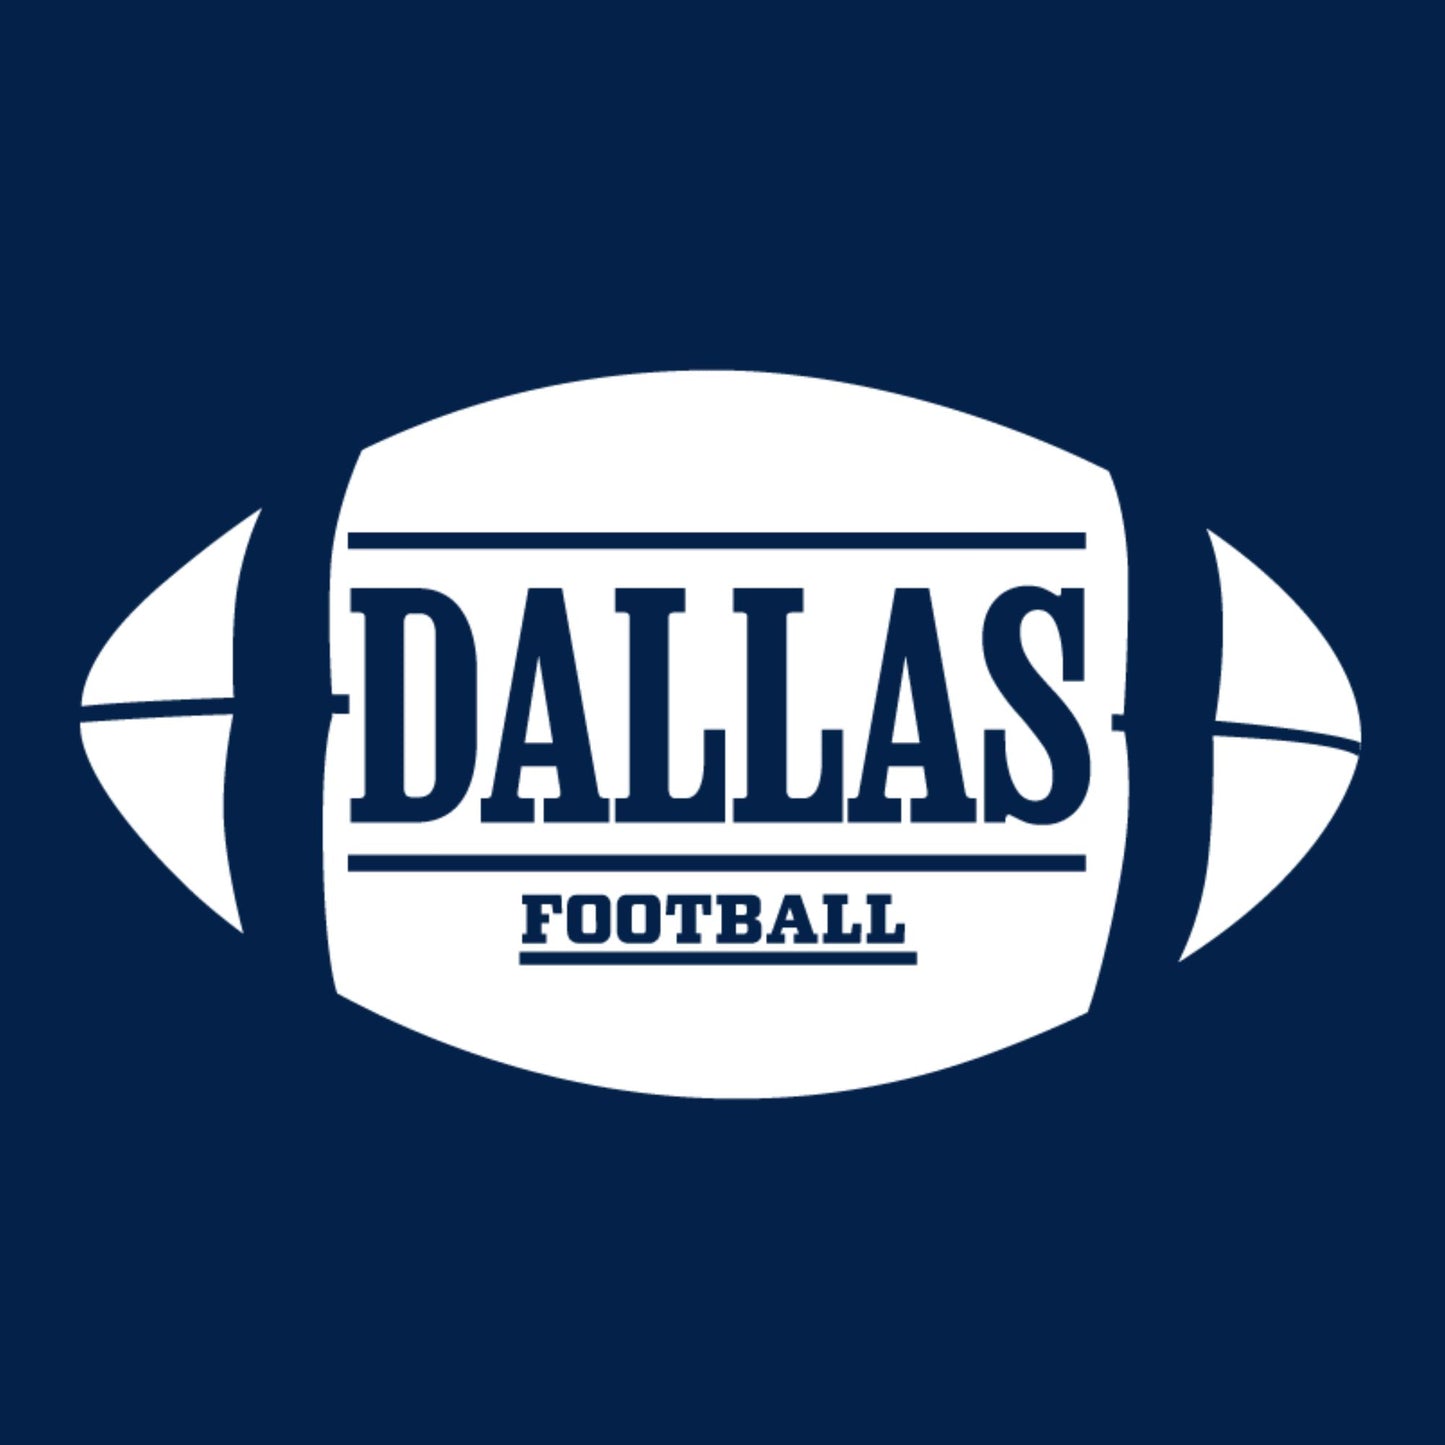 DAL LAS Football Fan T-Shirt: Showcase Your Team Spirit with This Dynamic Tee - Perfect Blend of DAL LAS Pride and Football Passion | Explore Stylish Fan Apparel